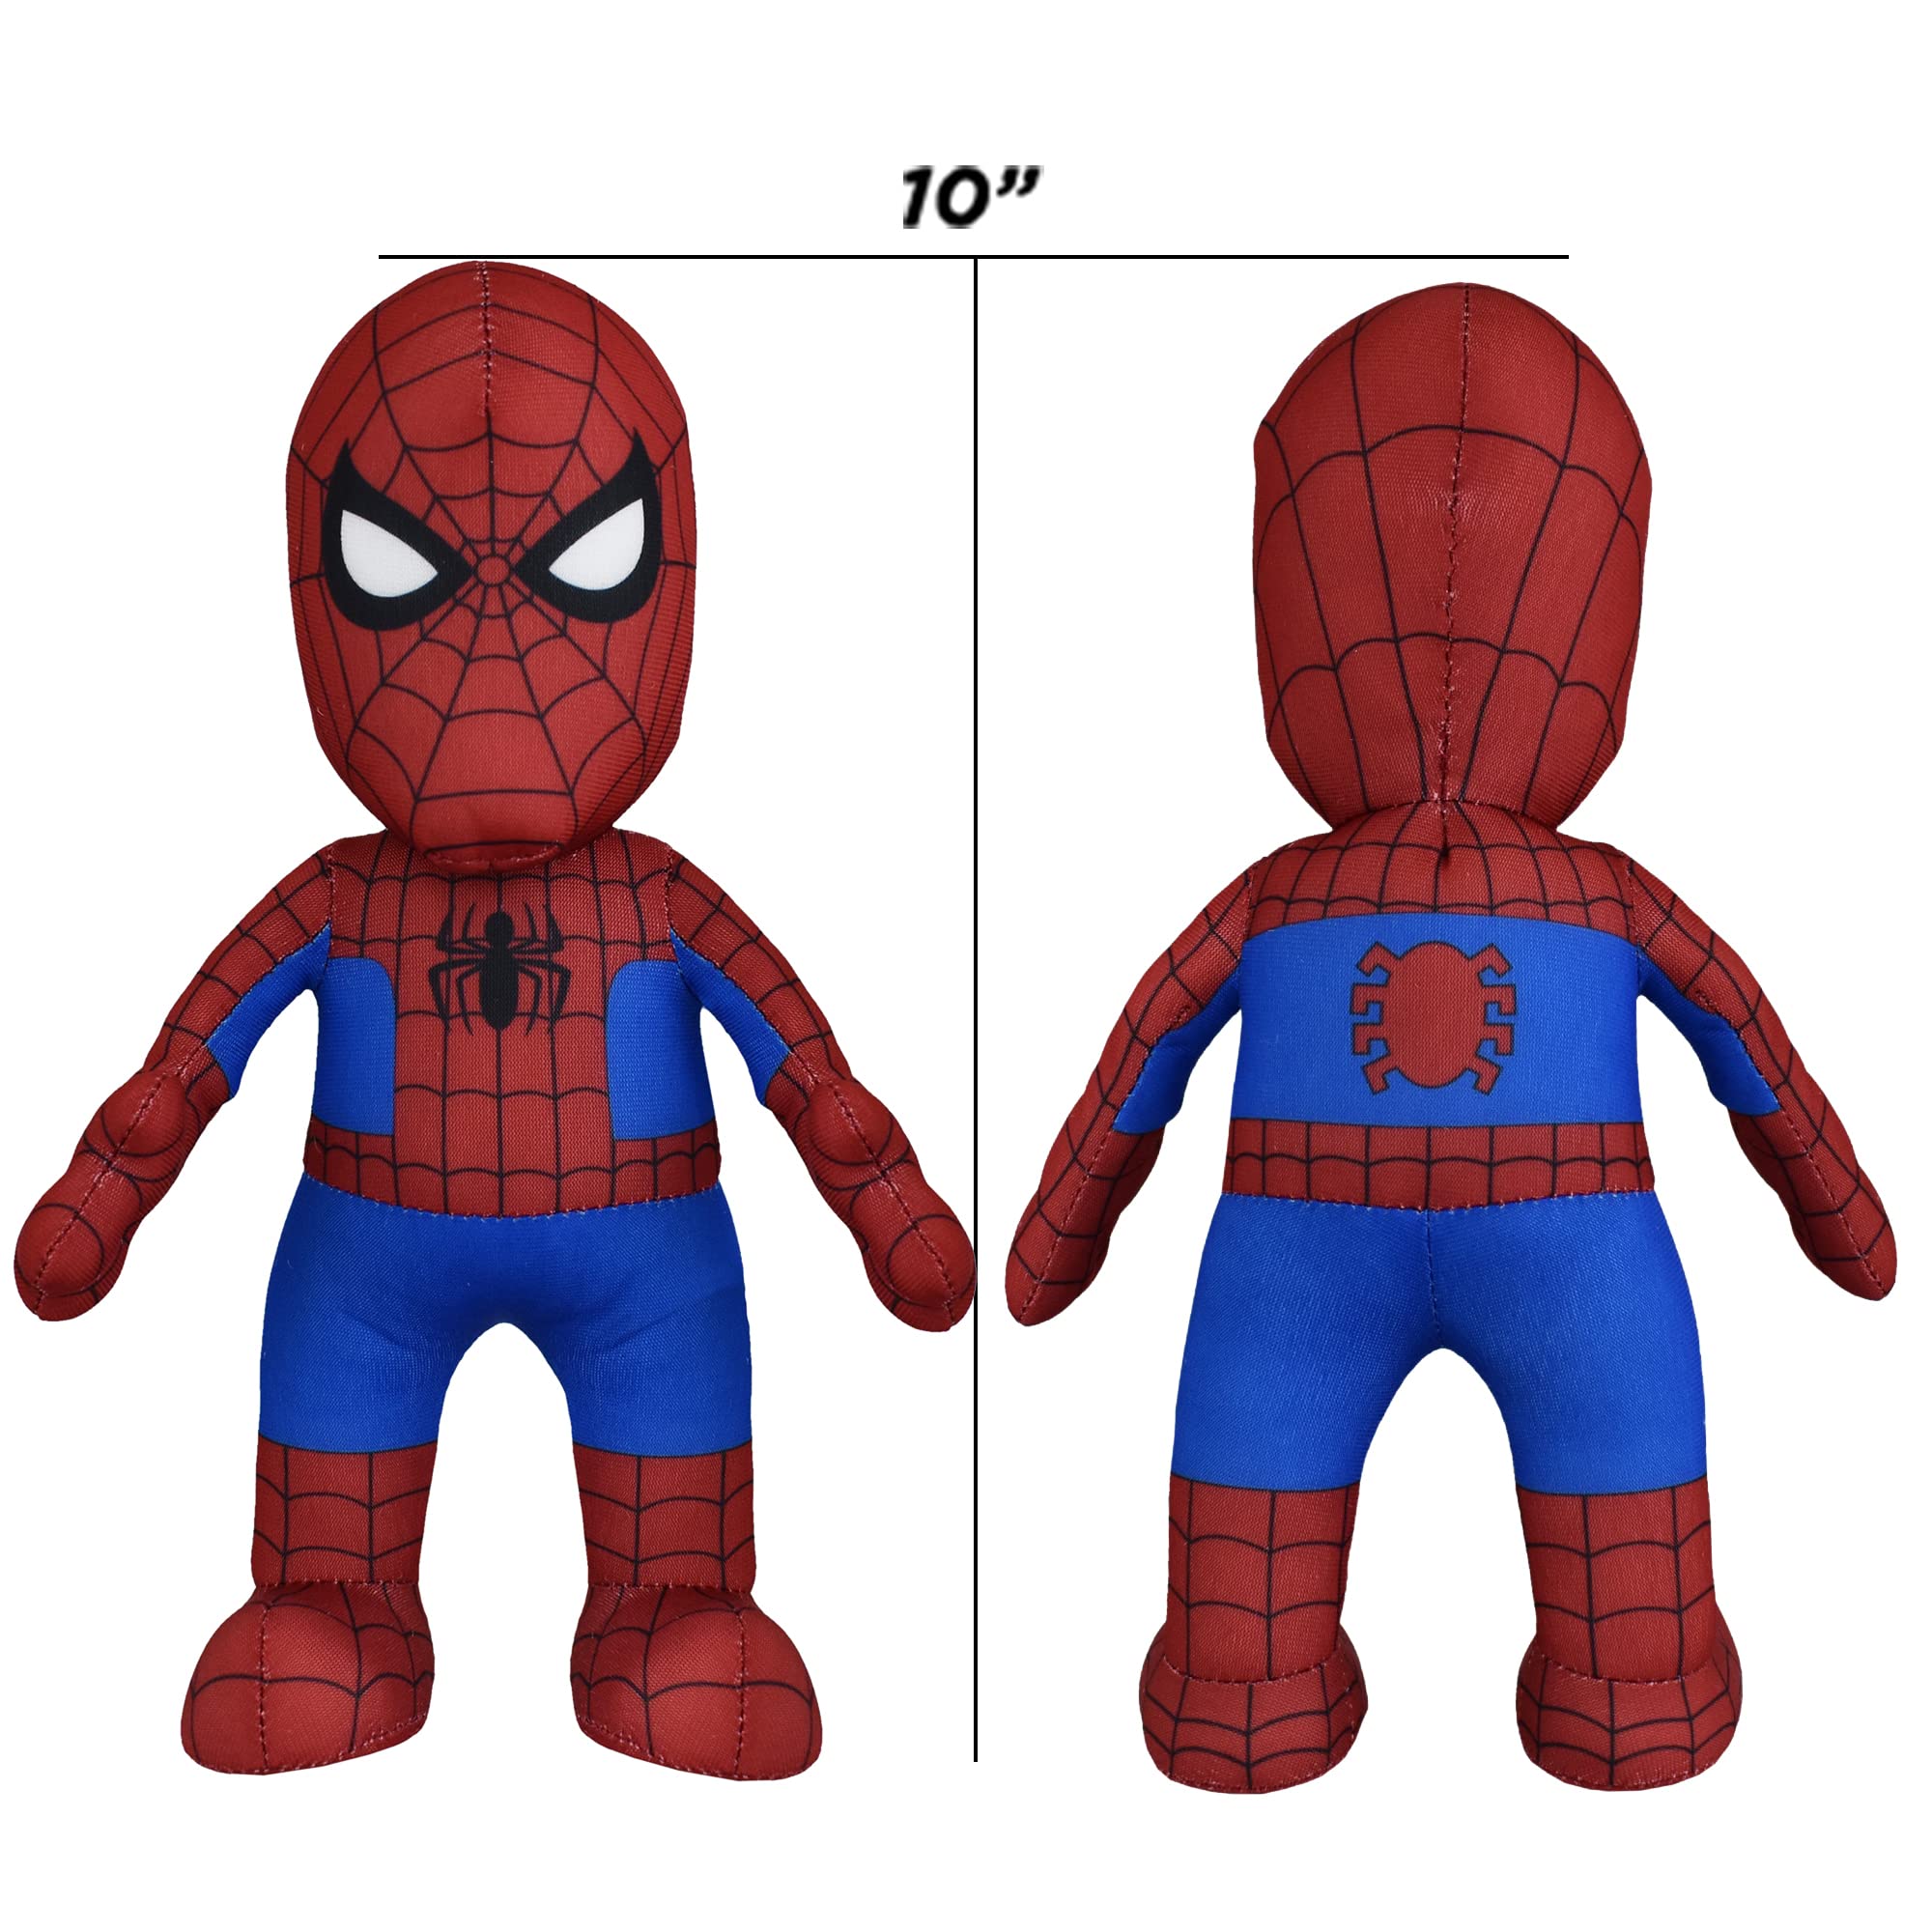 Marvel Spiderman 10" Plush Figure | Bleacher Creatures | A Superhero for Play and Display | Free S&H With Prime $14.95